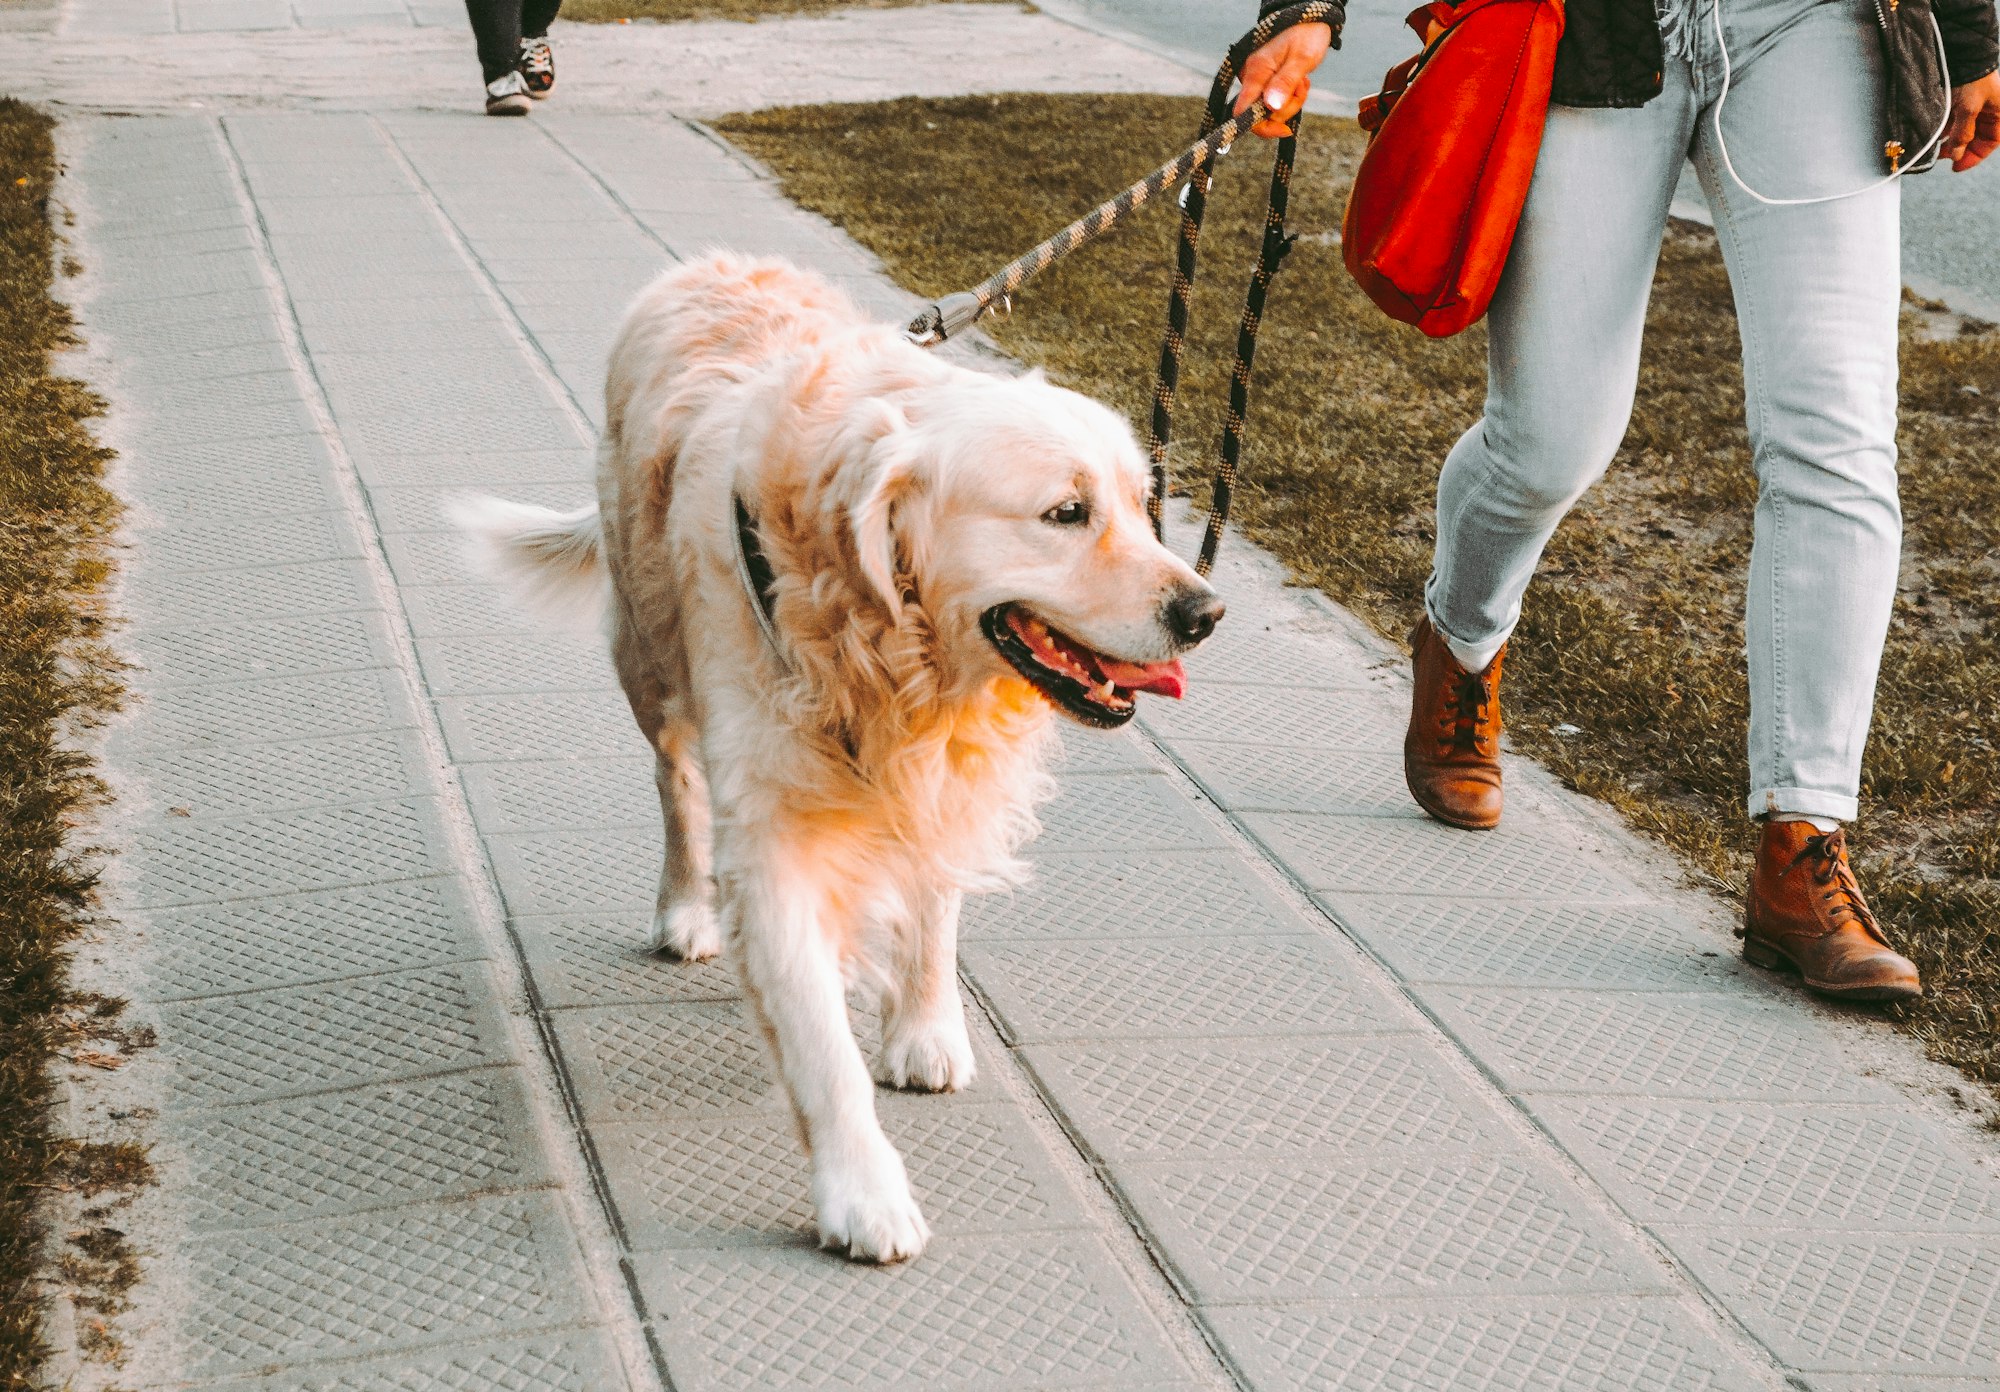 The Art of Leash Training: How to Leash Train Your Dog